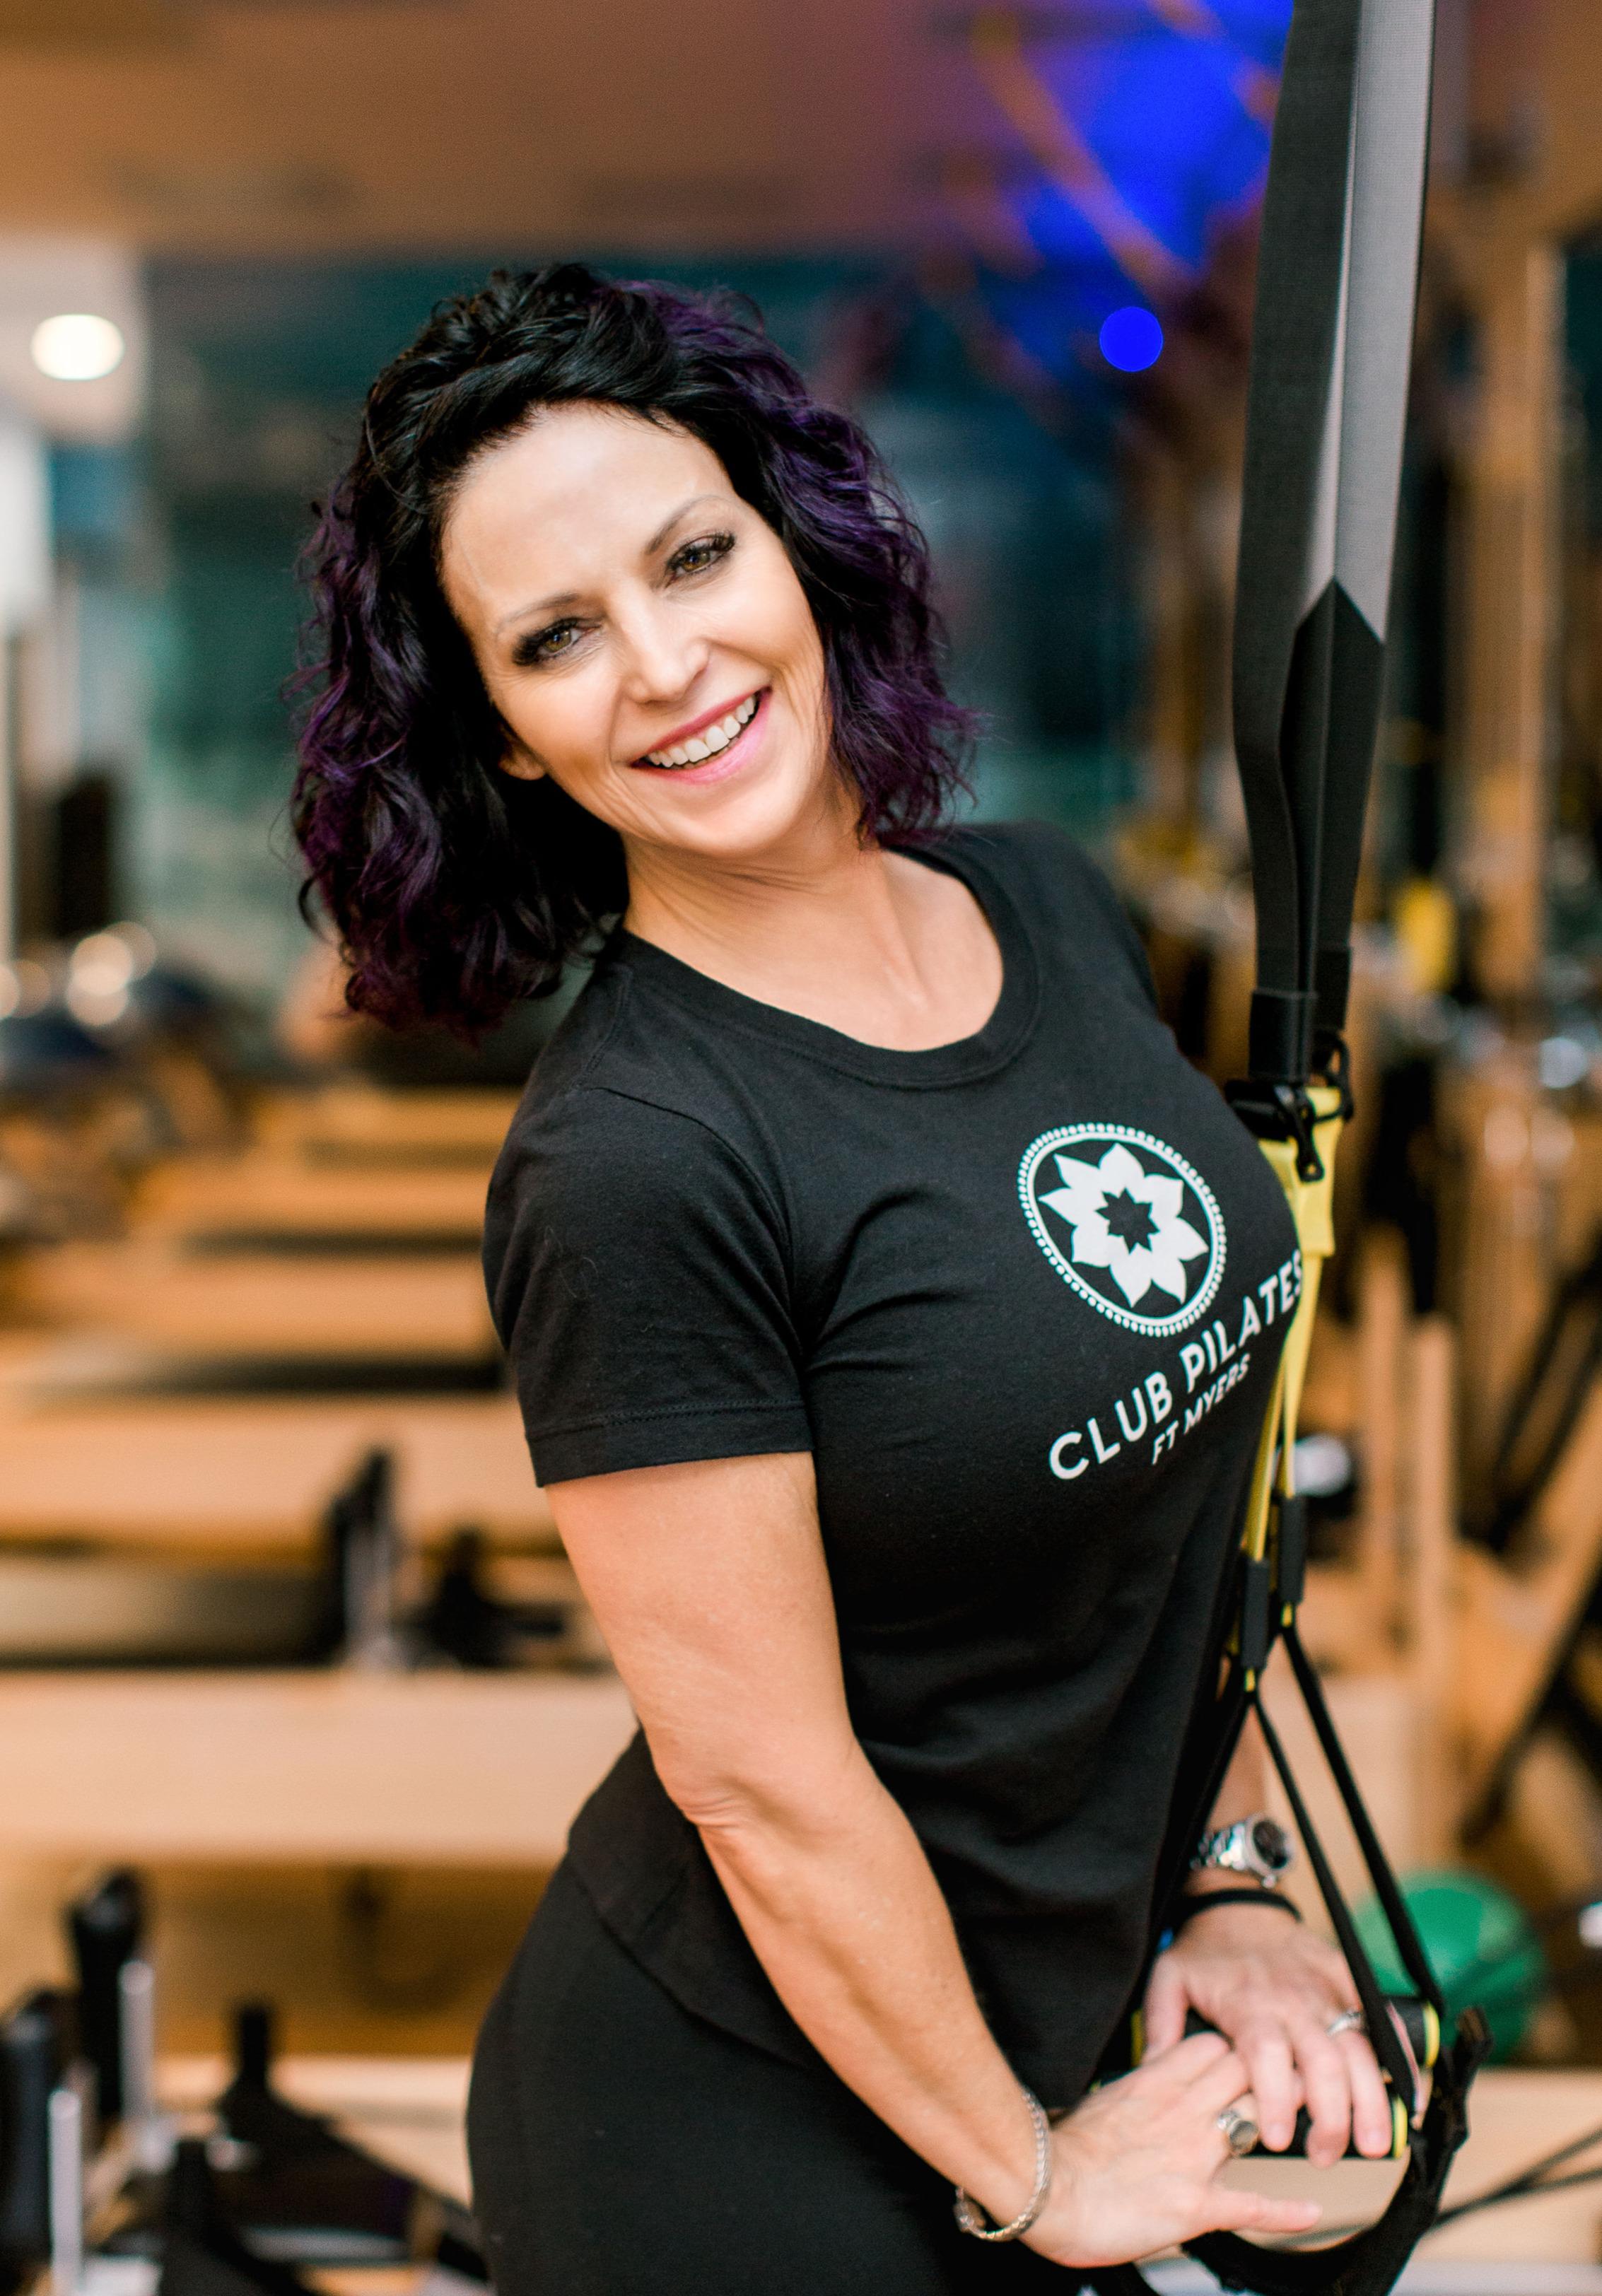 Shannon Willits, Owner and Master Trainer